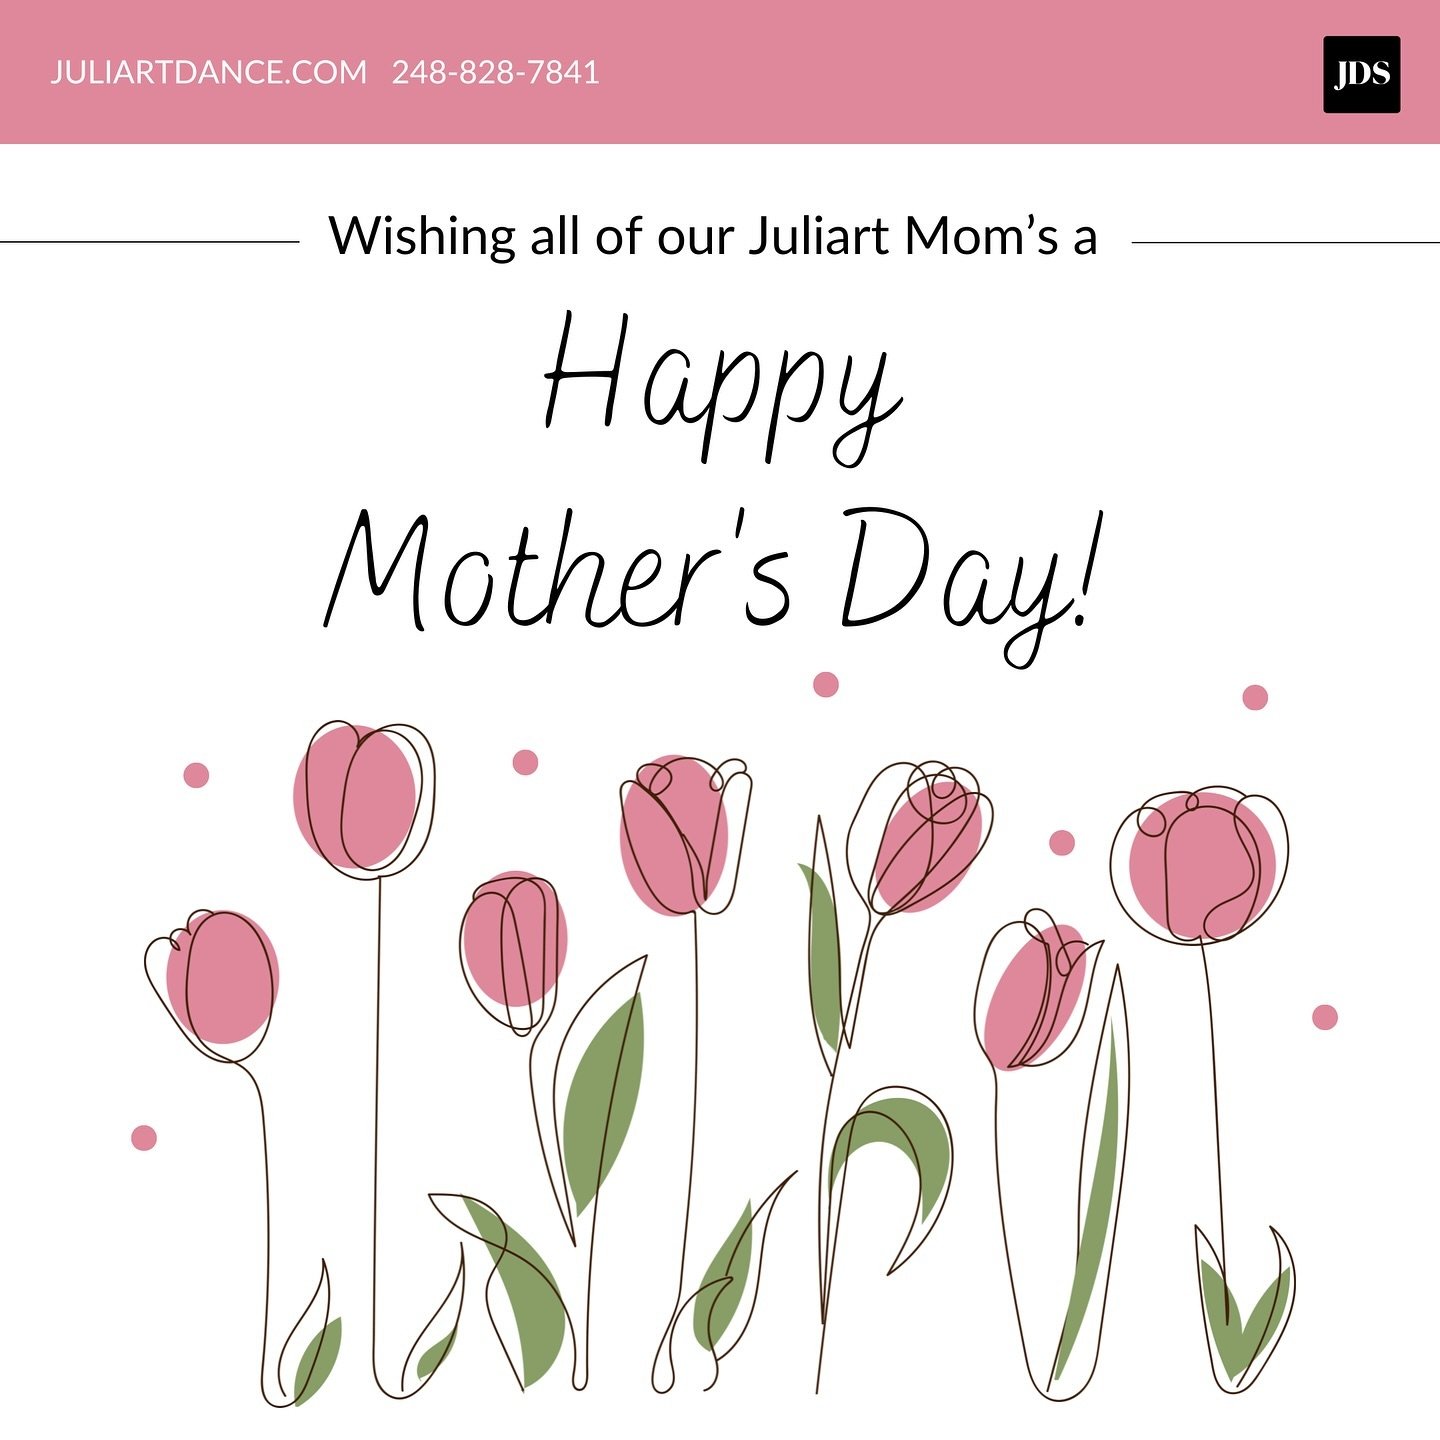 Happy Mother&rsquo;s Day to all of our amazing Juliart Mom&rsquo;s!!! Hope everyone has a wonderful day🌷🤍
&bull;
&bull;
&bull;
#juliartdancestudio #juliartdance #happymothersday #mothersday #juliartmoms #juliartfamily #jds #juliartlove #michigandan